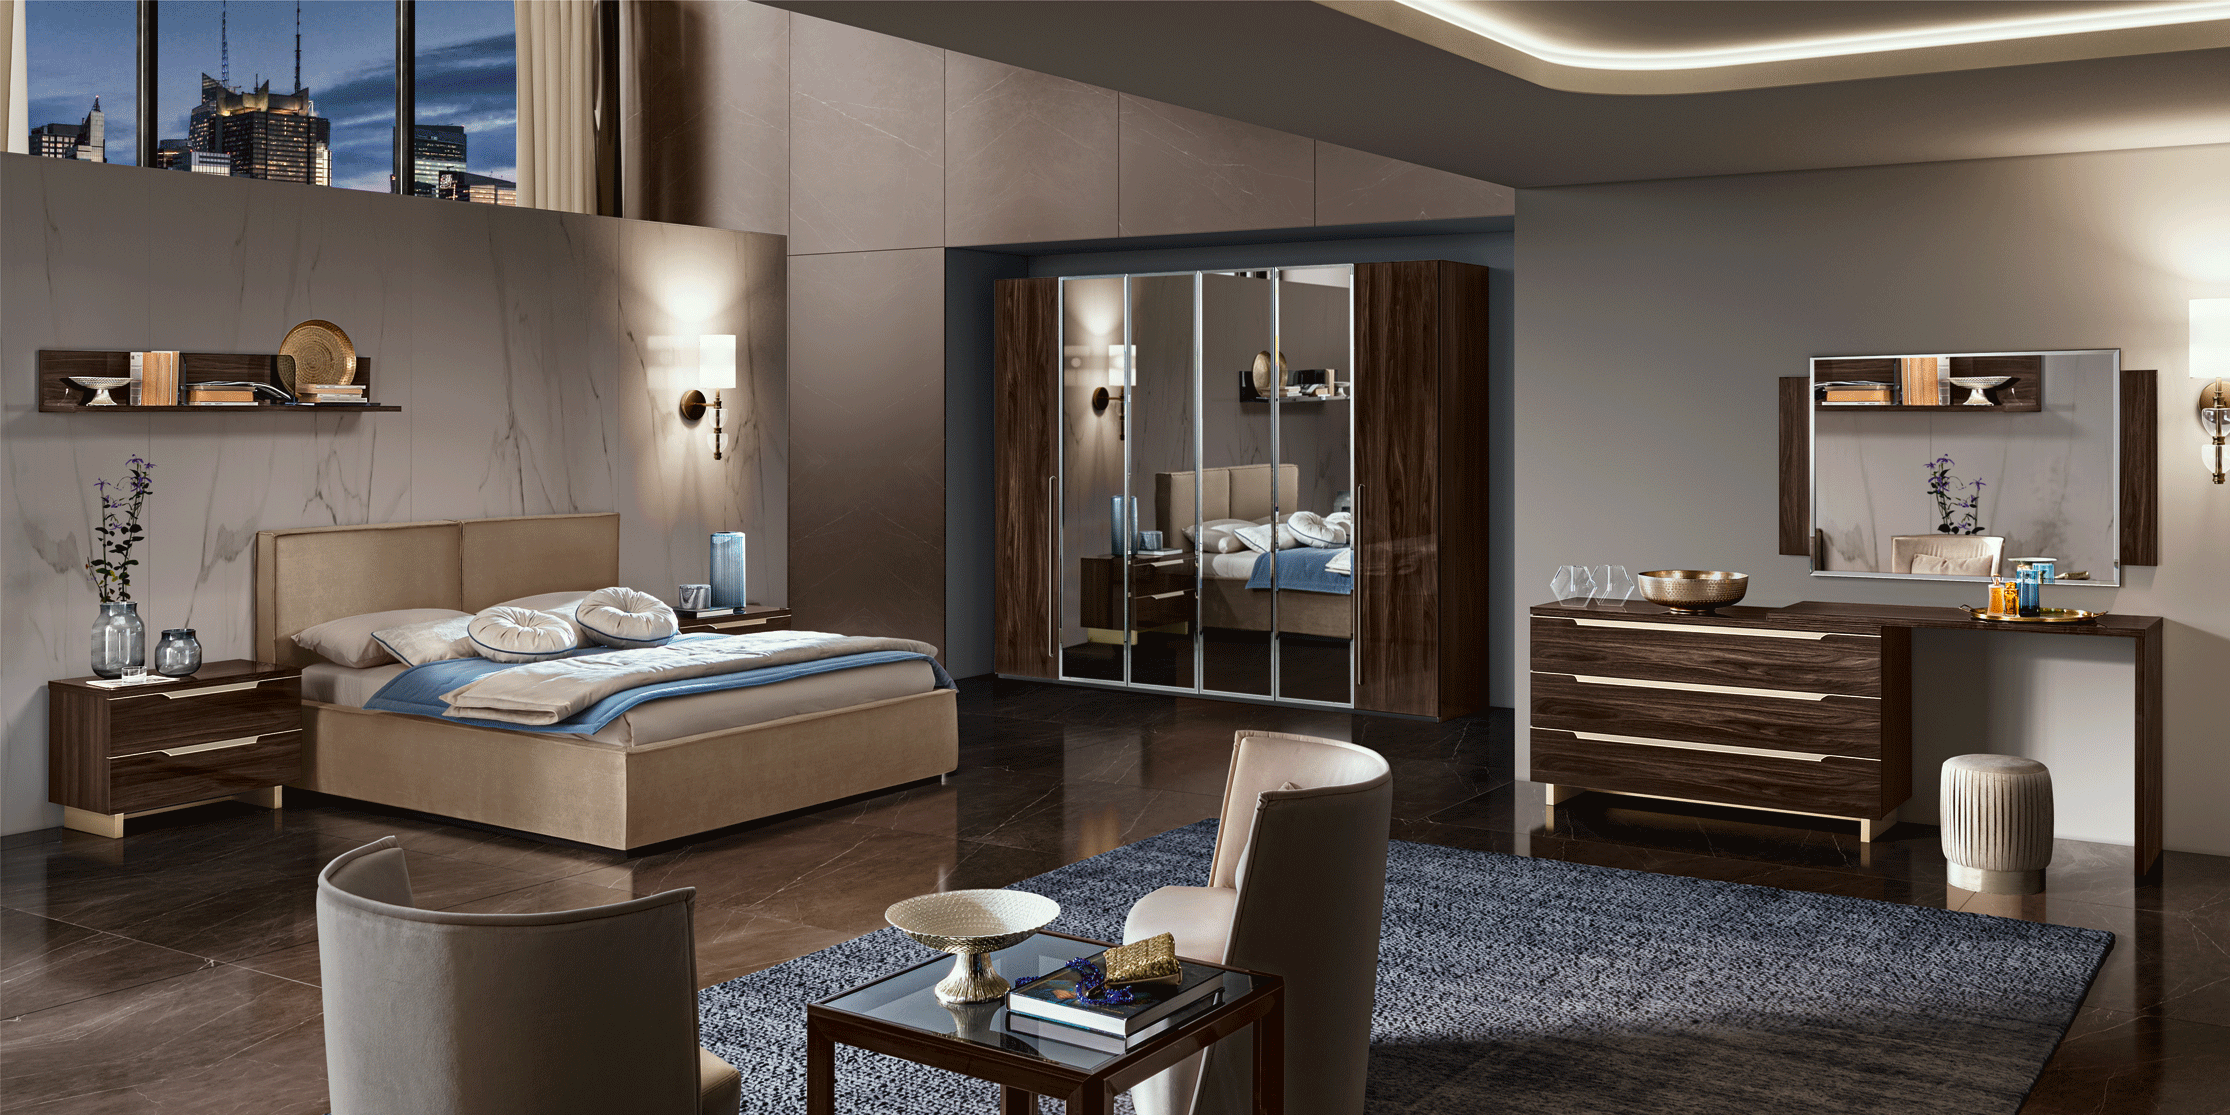 Brands Camel Gold Collection, Italy Smart Bedgroup Walnut Additional items